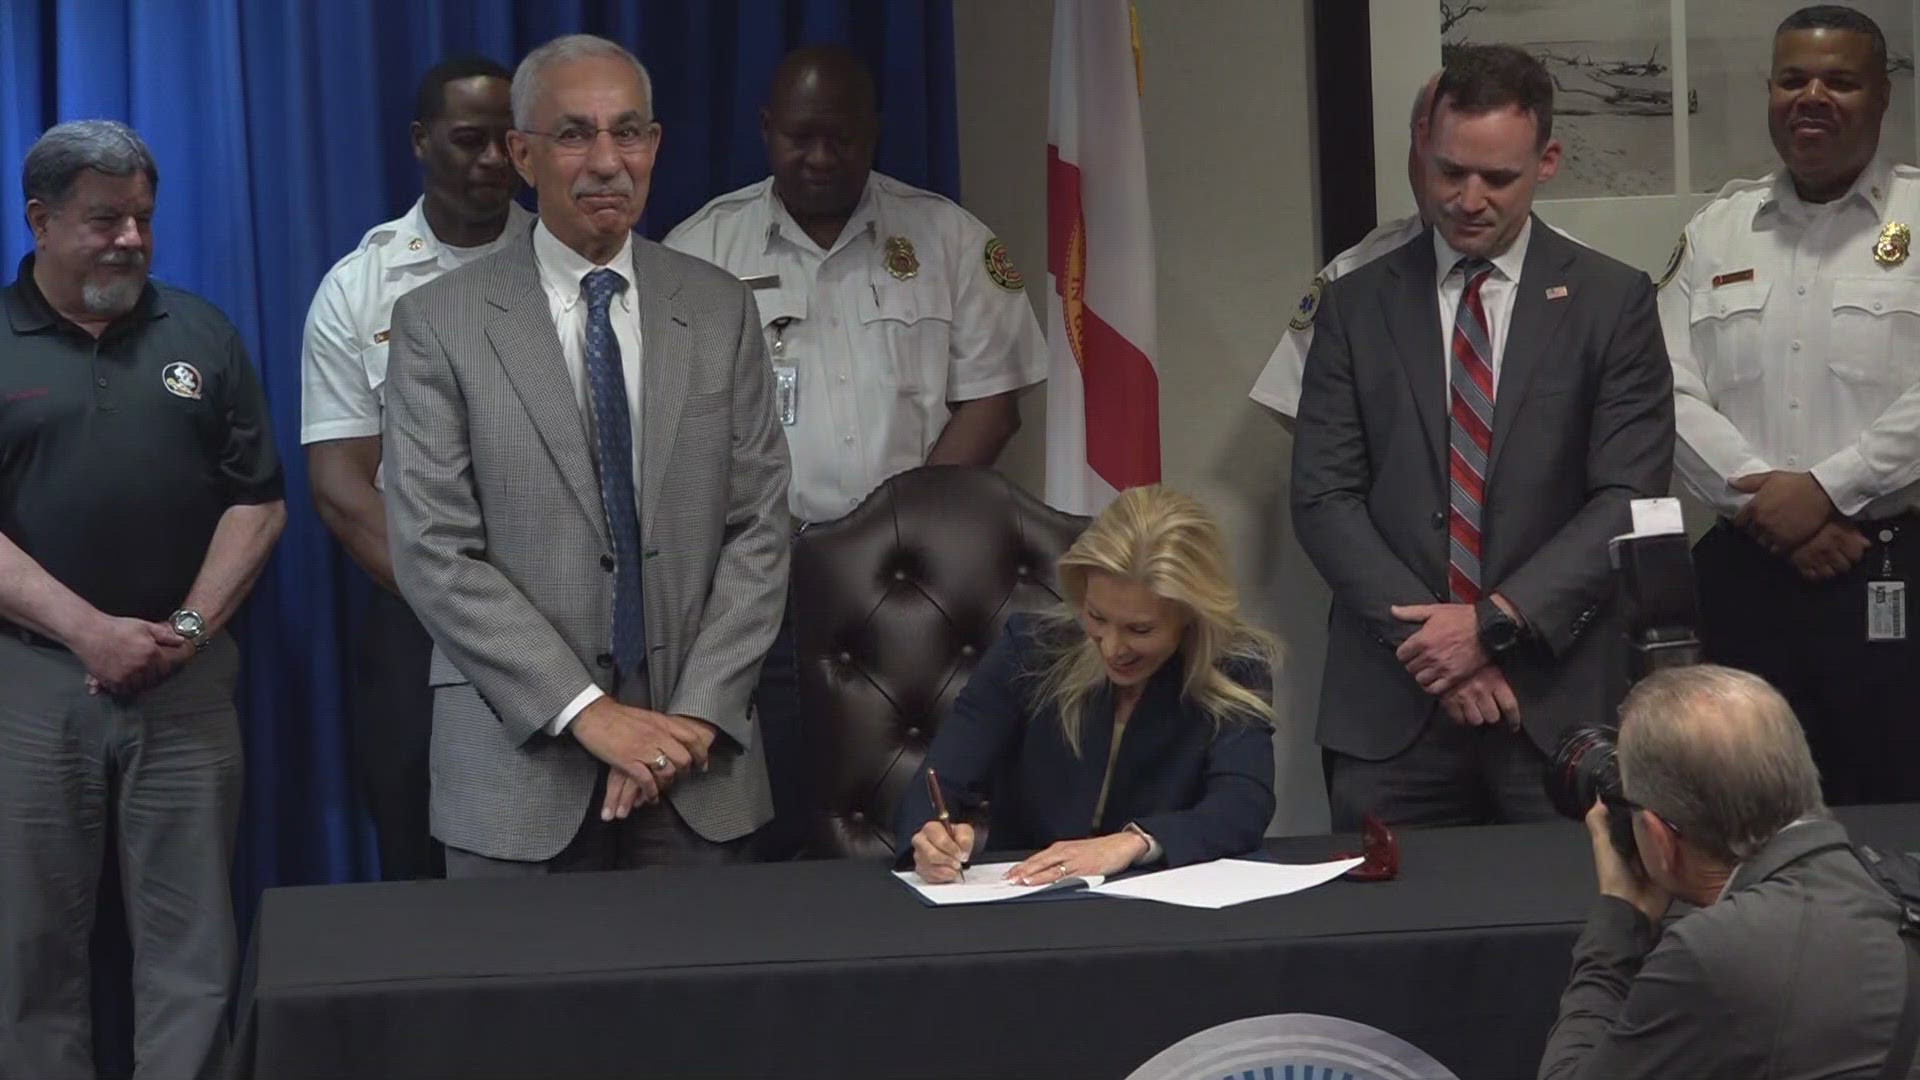 The Jacksonville Heroes Act will "provide increased benefits for city employees who also serve in the military." There are currently 40 active-duty city employees.